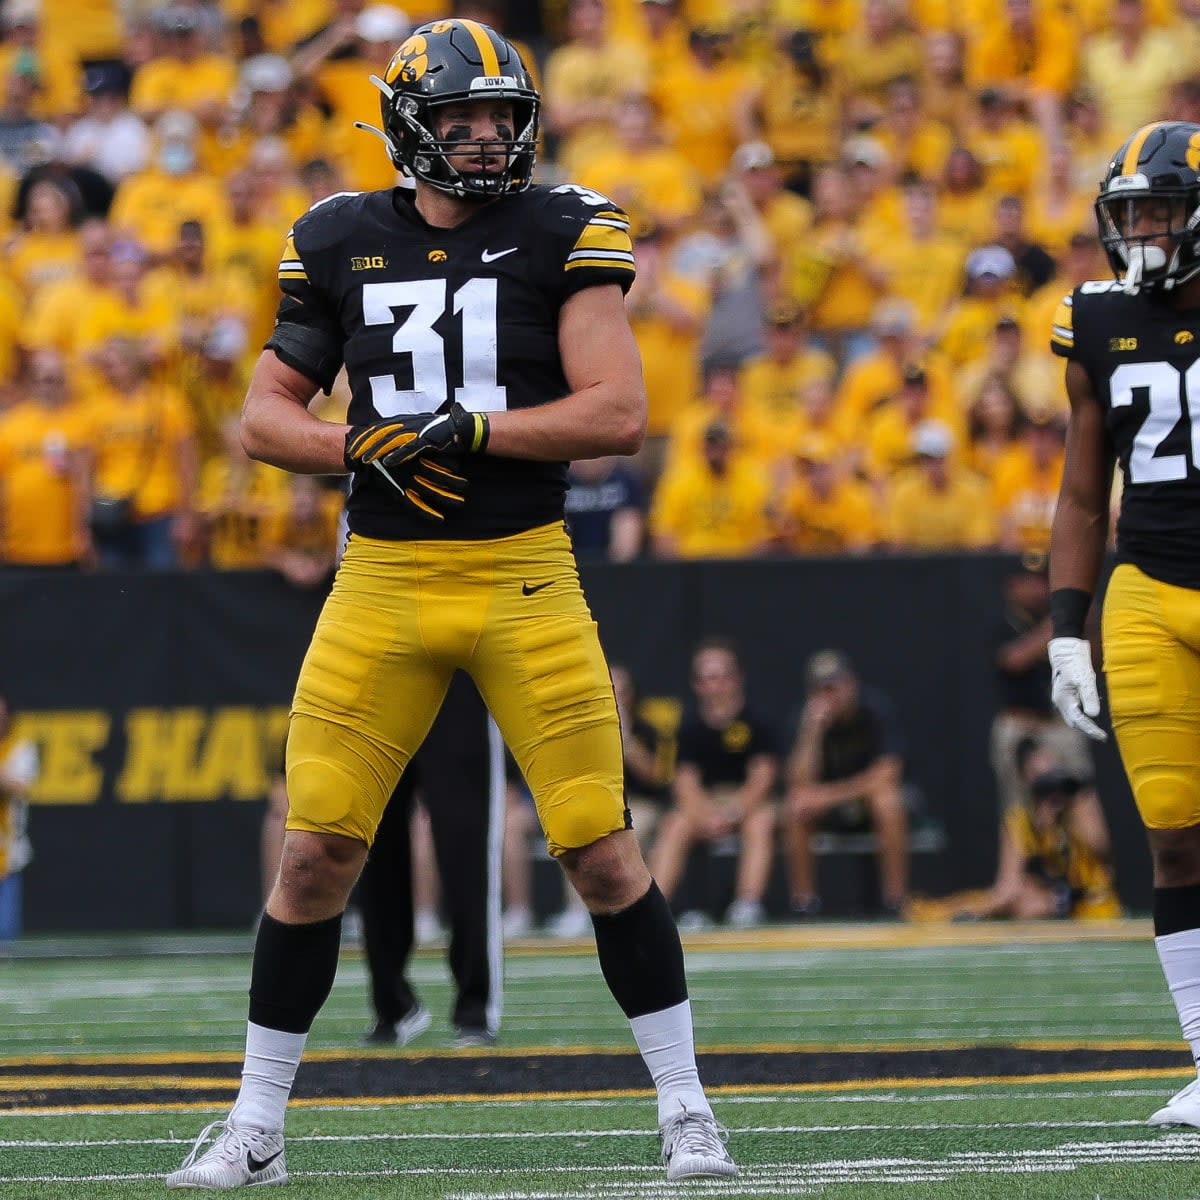 2023 NFL Draft Prospect: Iowa's Jack Campbell Receives Multiple